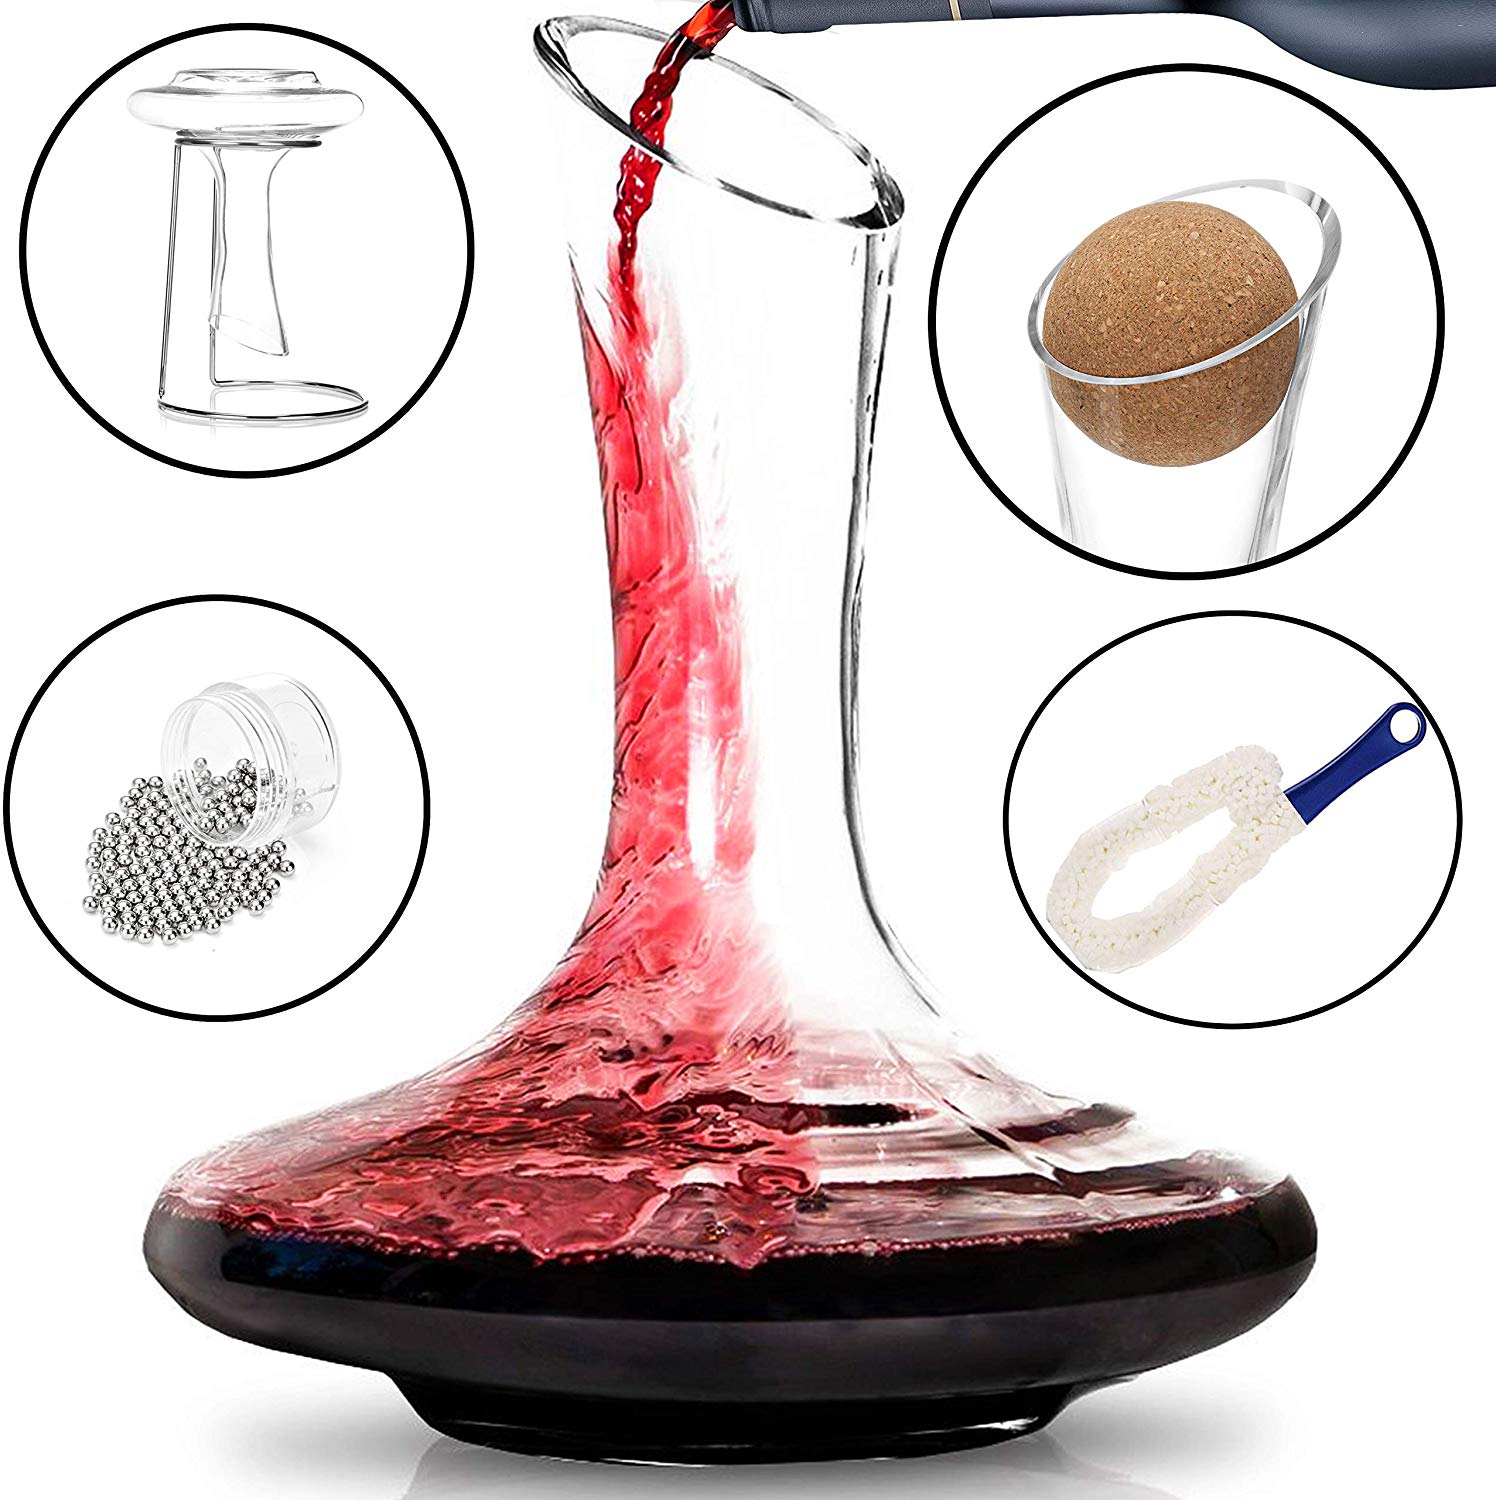 ELT Stainless Steel Wine Decanter Stand Wine Drying Rack Bottle Stable Ring Shaped Wine Decanter for Home Bar